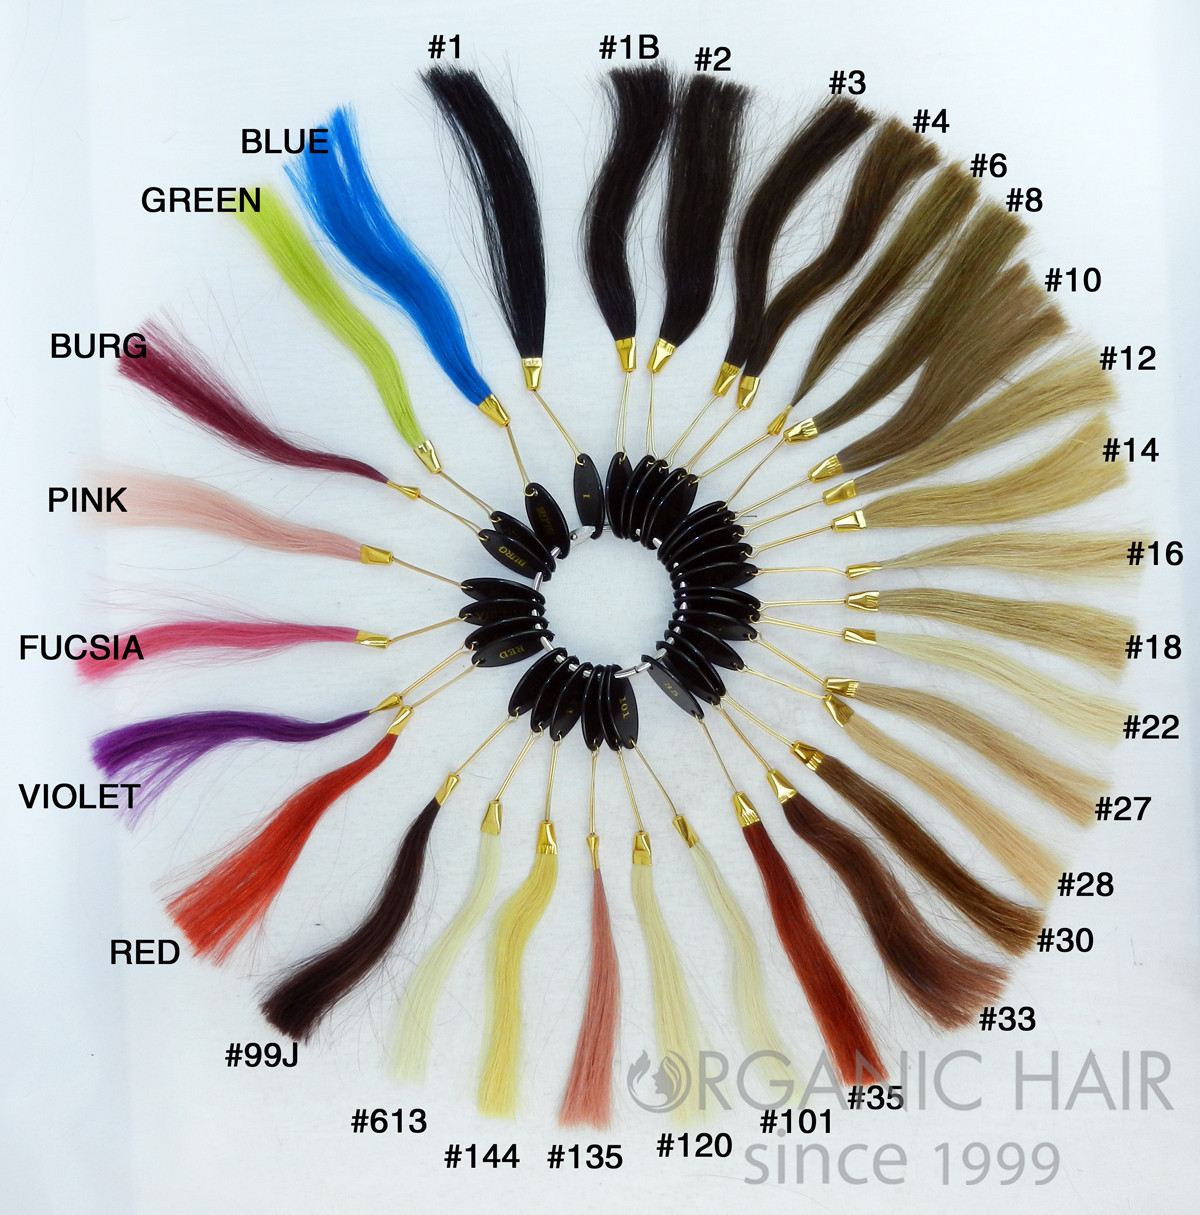 Organic hair factory Color Ring color swatch